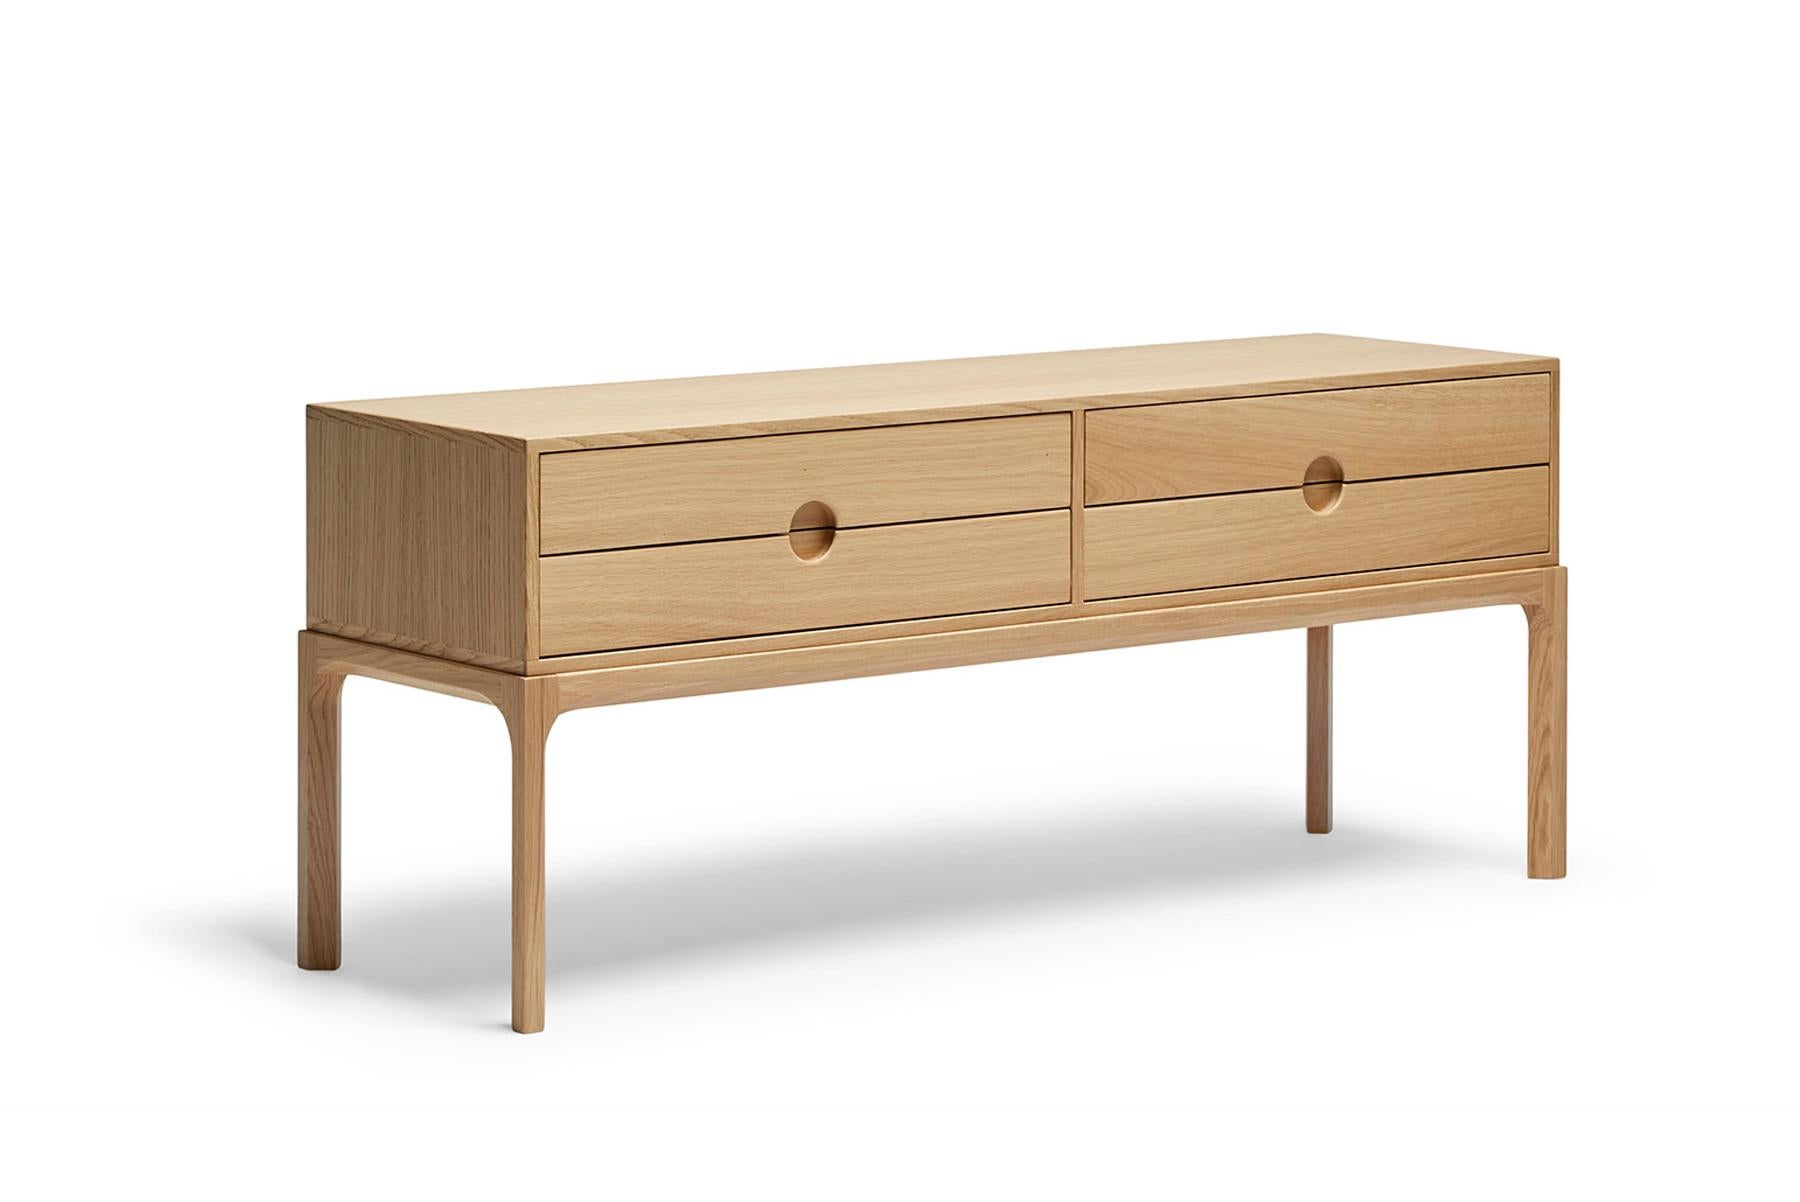 Originally designed by Kai Kristiansen for Axel Kjersgaard in the 1960s. This piece is hand built at Getama's factory in Gedsted, Denmark by skilled cabinetmakers using traditional Scandinavian techniques.